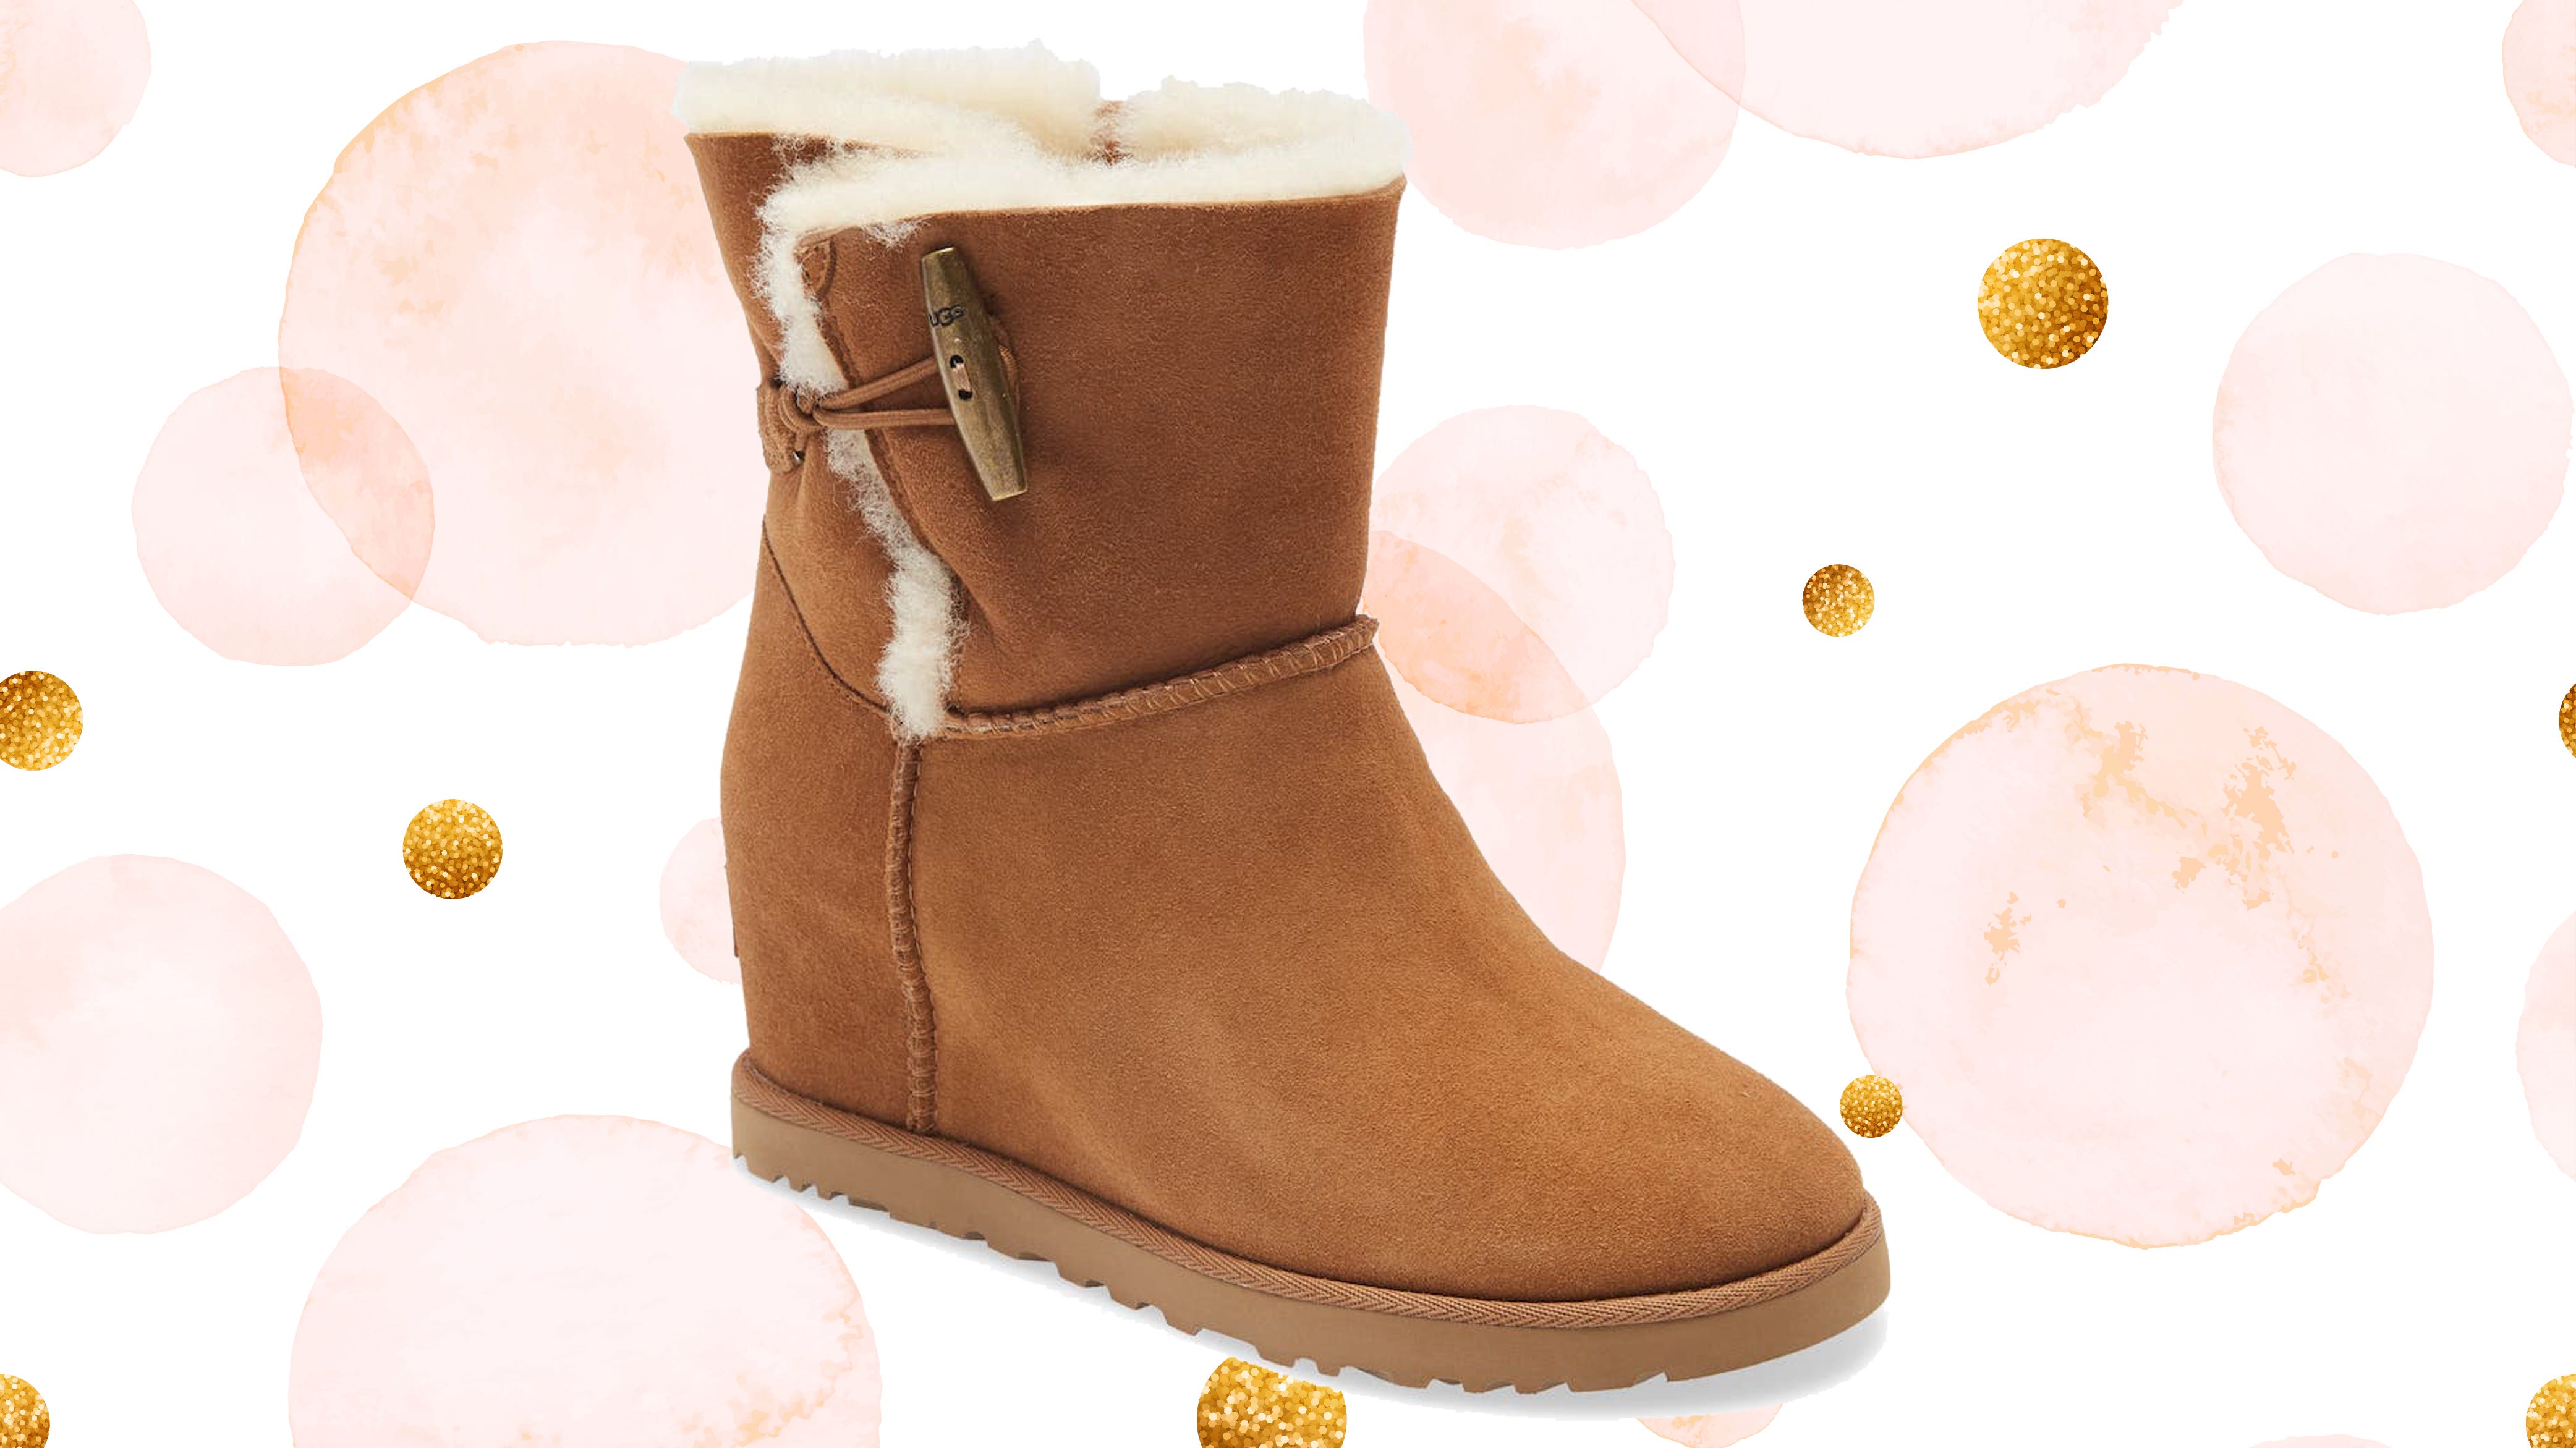 cheap ugg boots sale